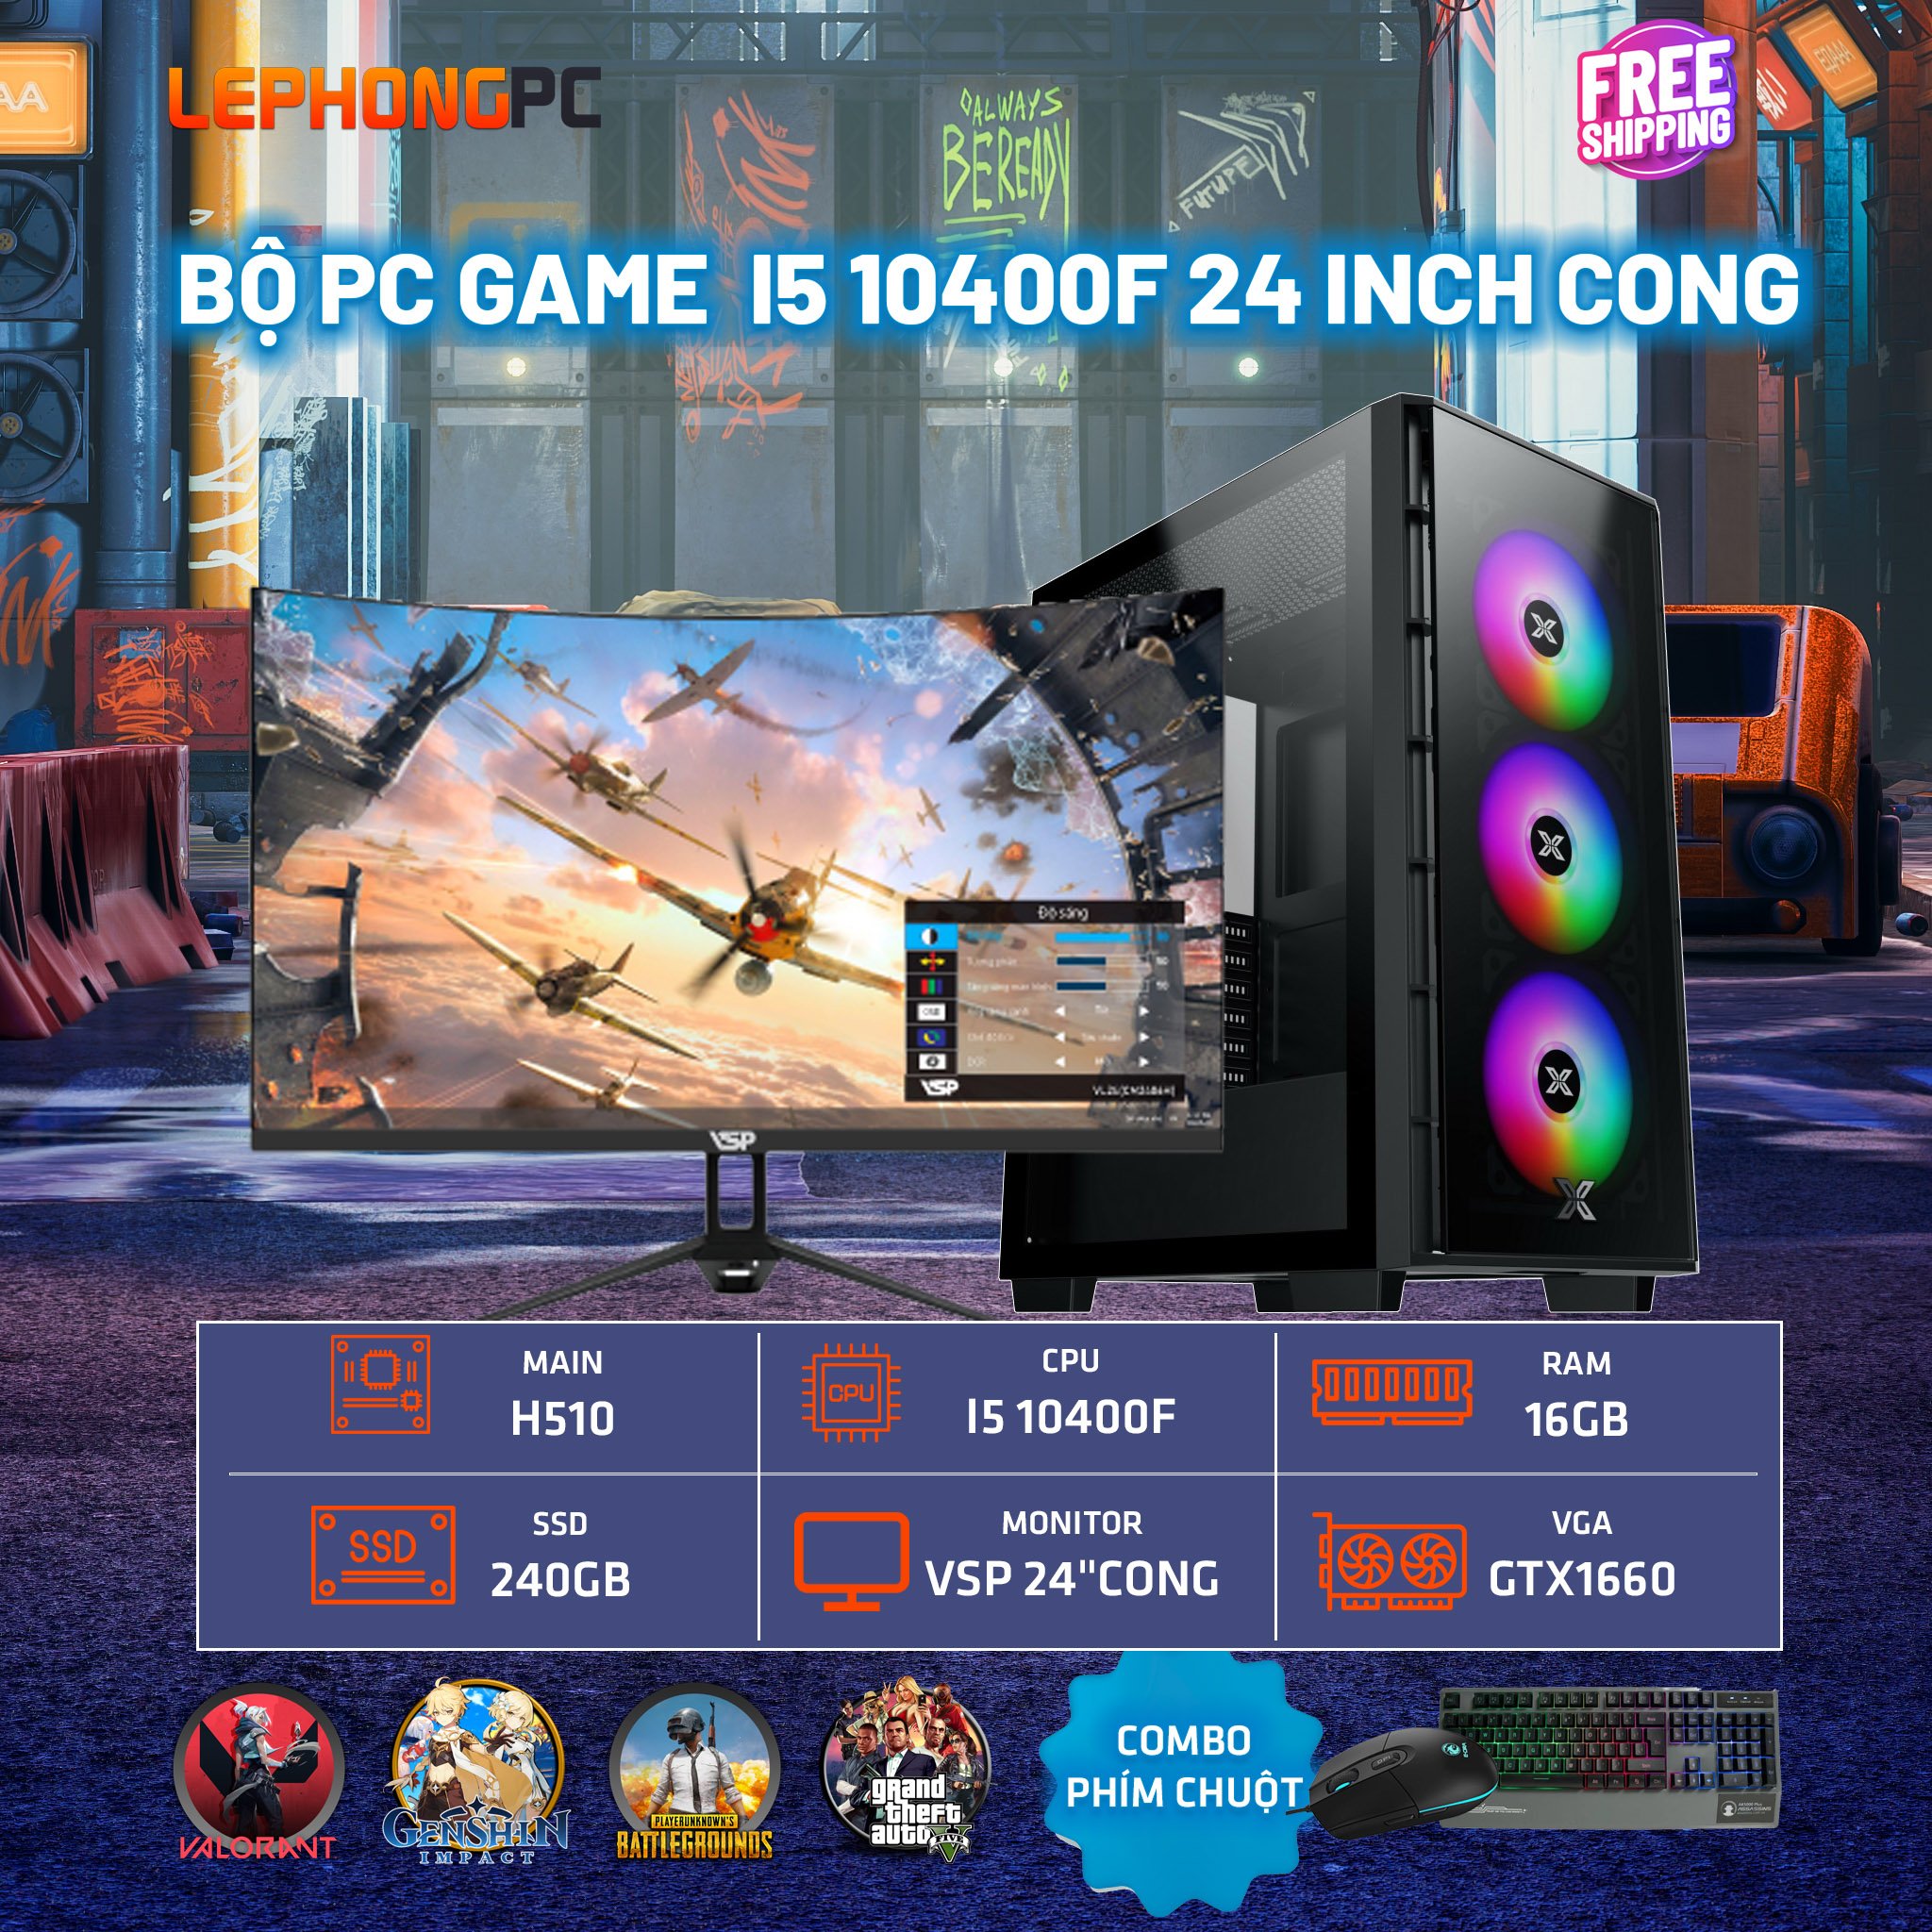 BO PC GAME I5 10400F 24 INCH CONG 30 12 22